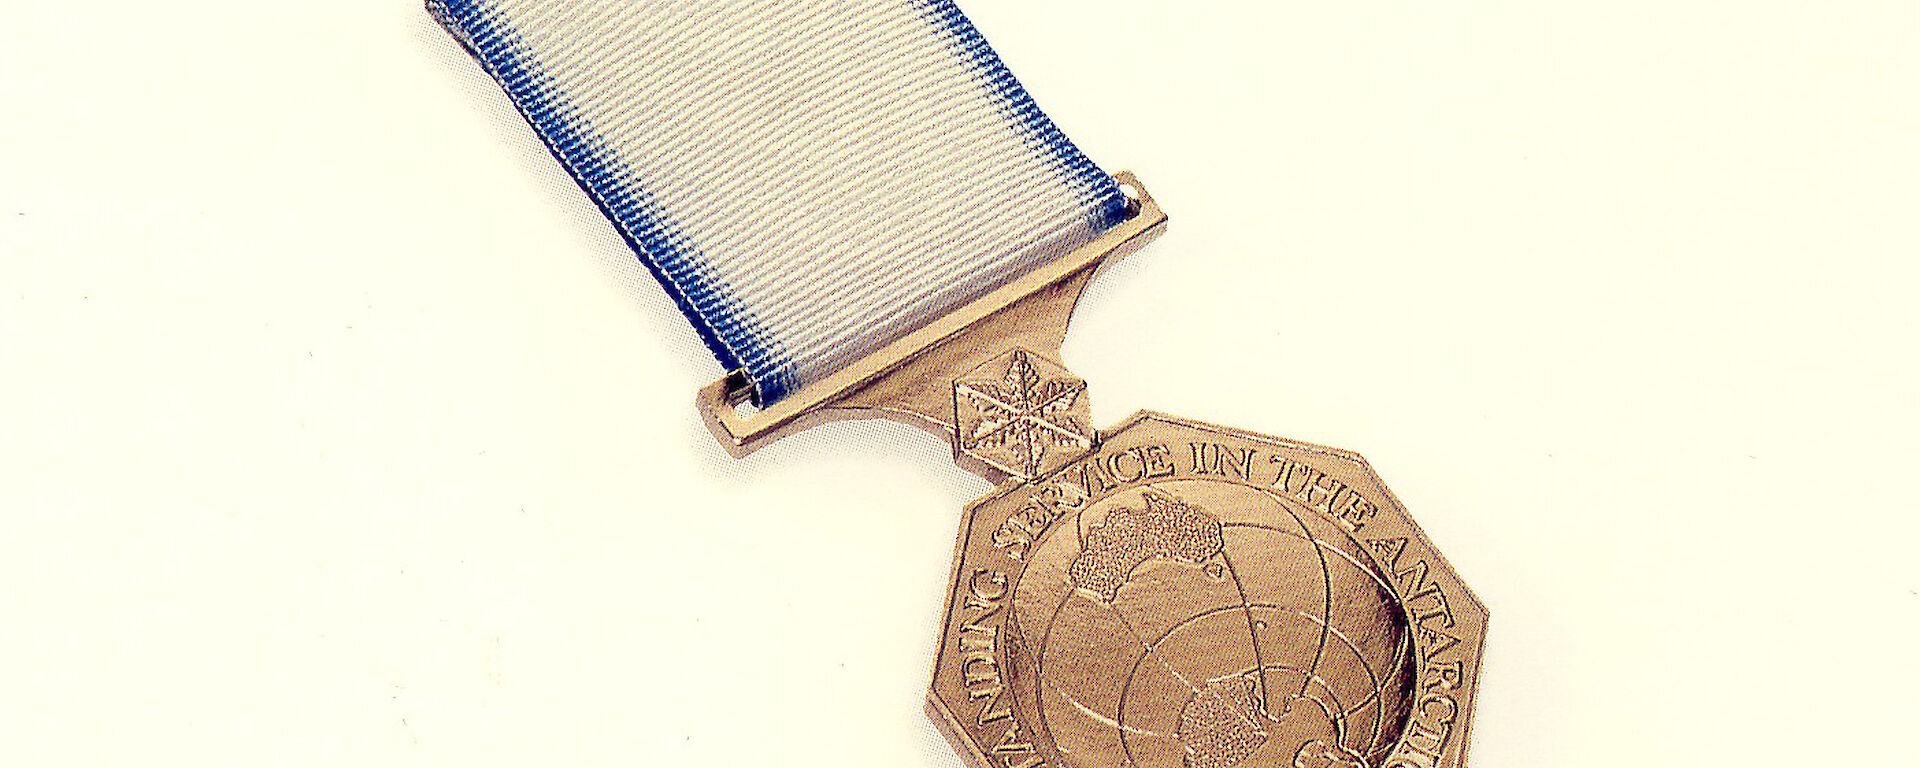 This bronze medal shows a map of Antarctica and the words ‘For outstanding service in the Antarctic'